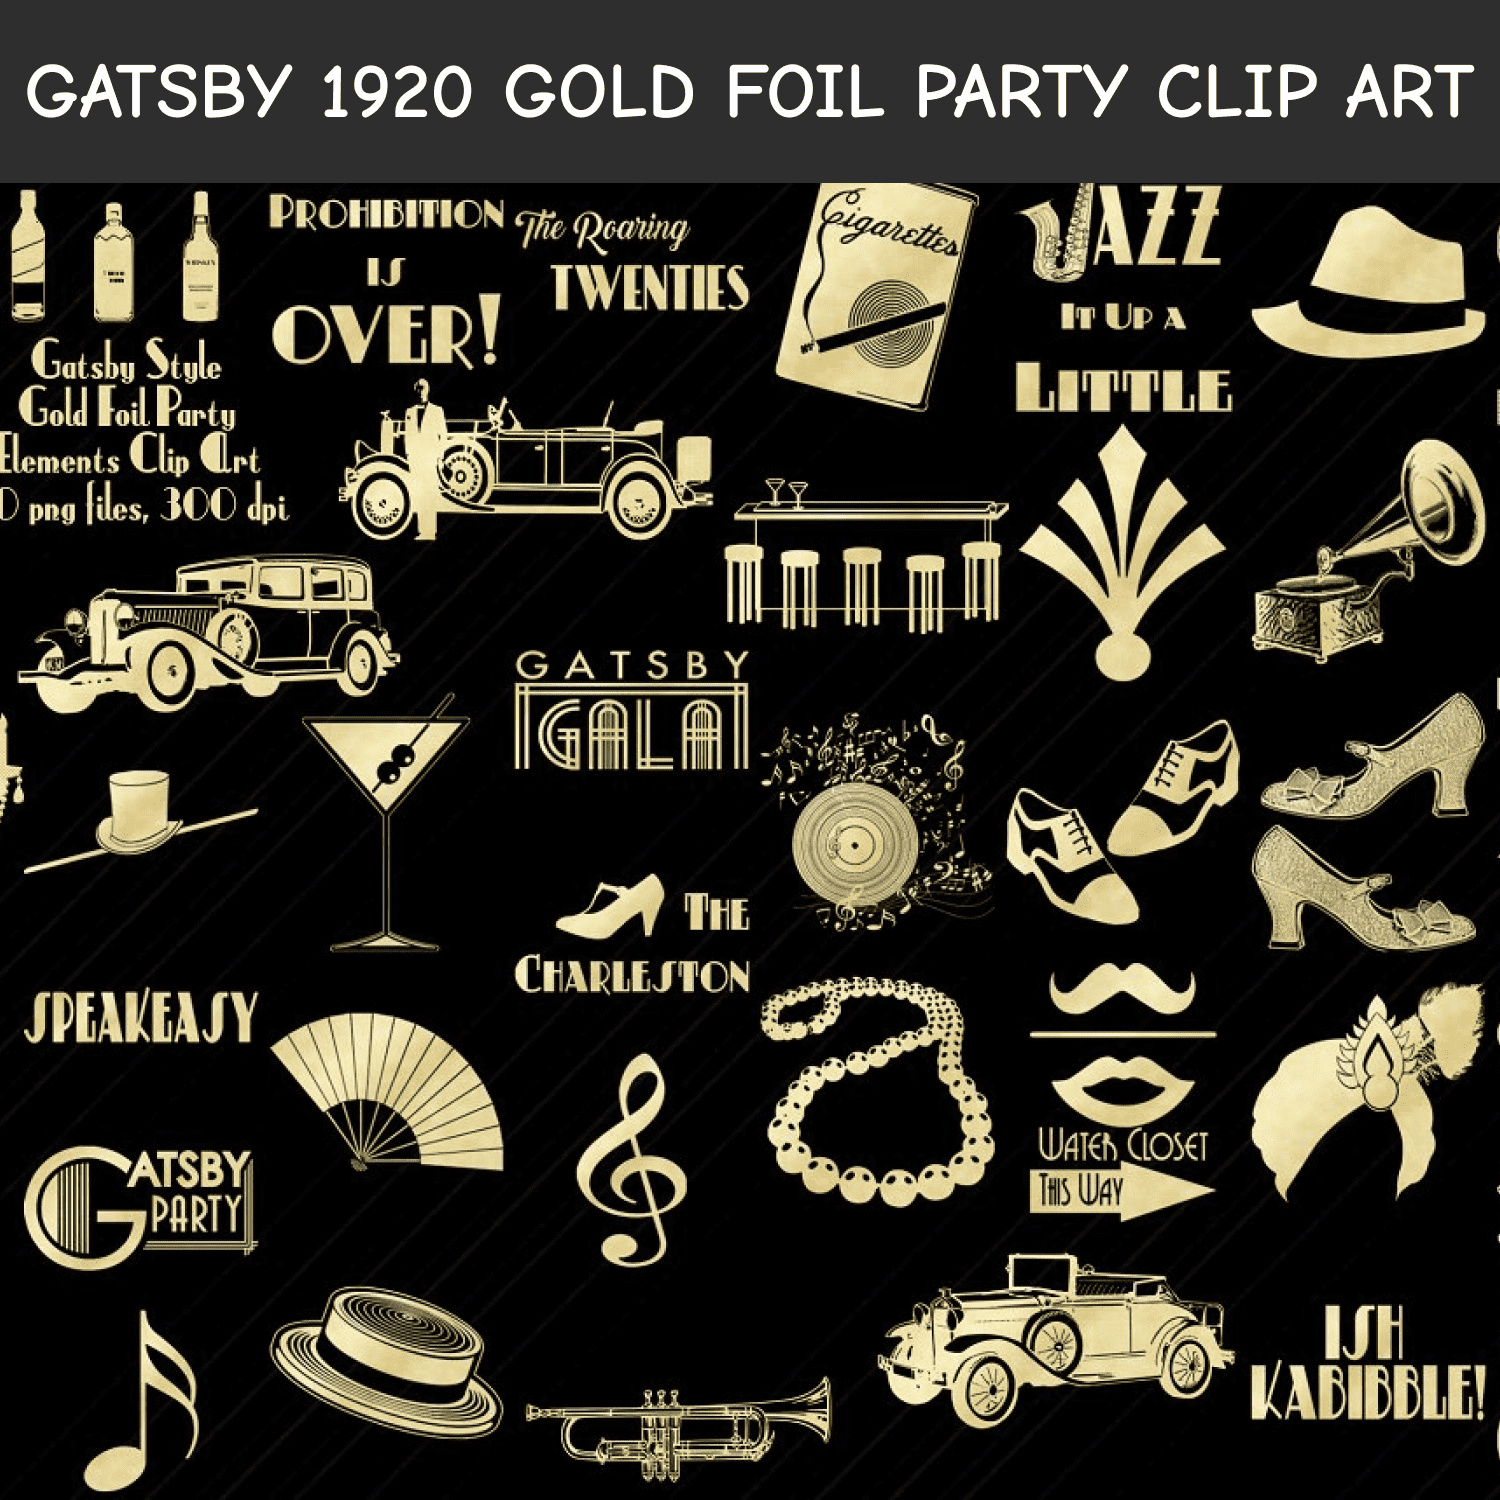 gatsby 1920 gold foil party clip art cover image.